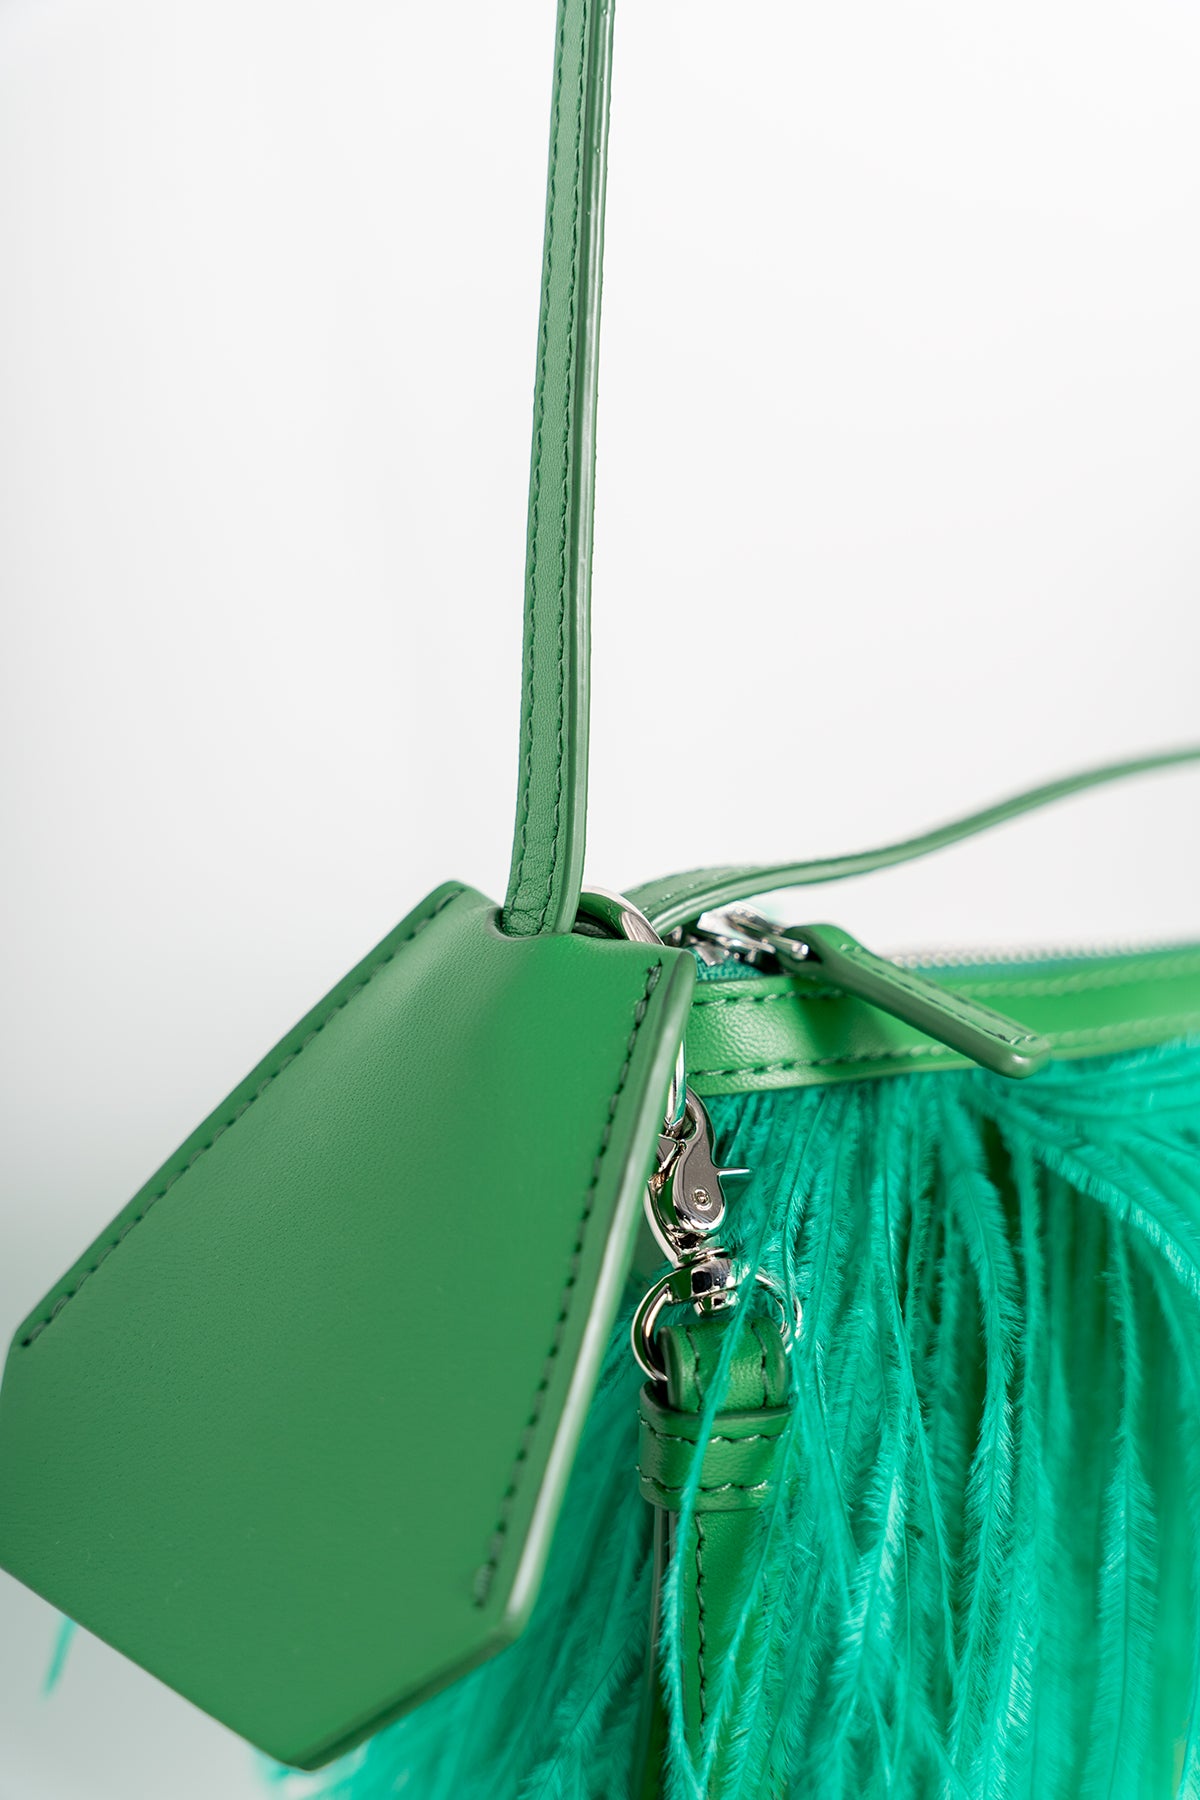 GREEN FEATHER BAG